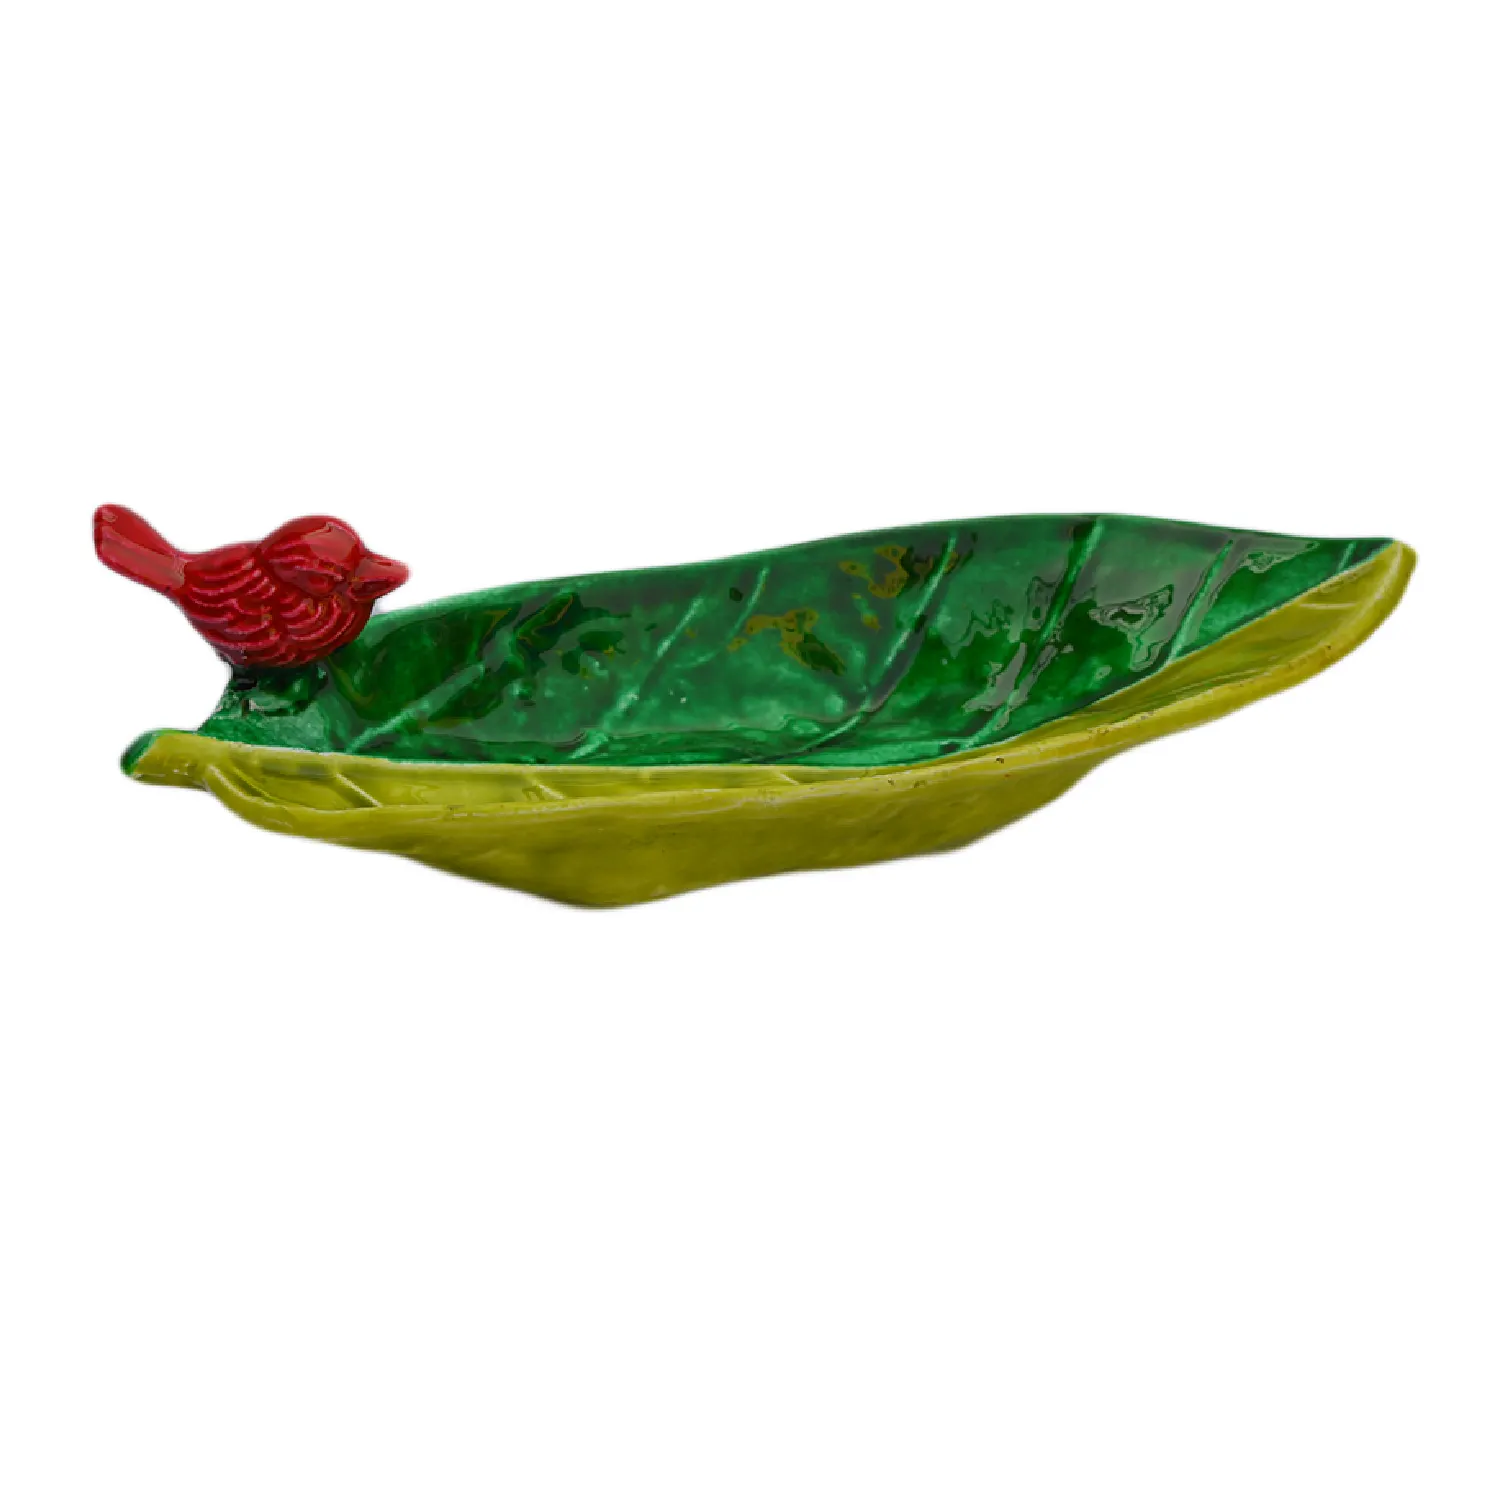 Best For Hotel Tableware Decorative Mixed Bowl Design With Bird Setting On The Leaf Shaped Stylish Storage Bowl